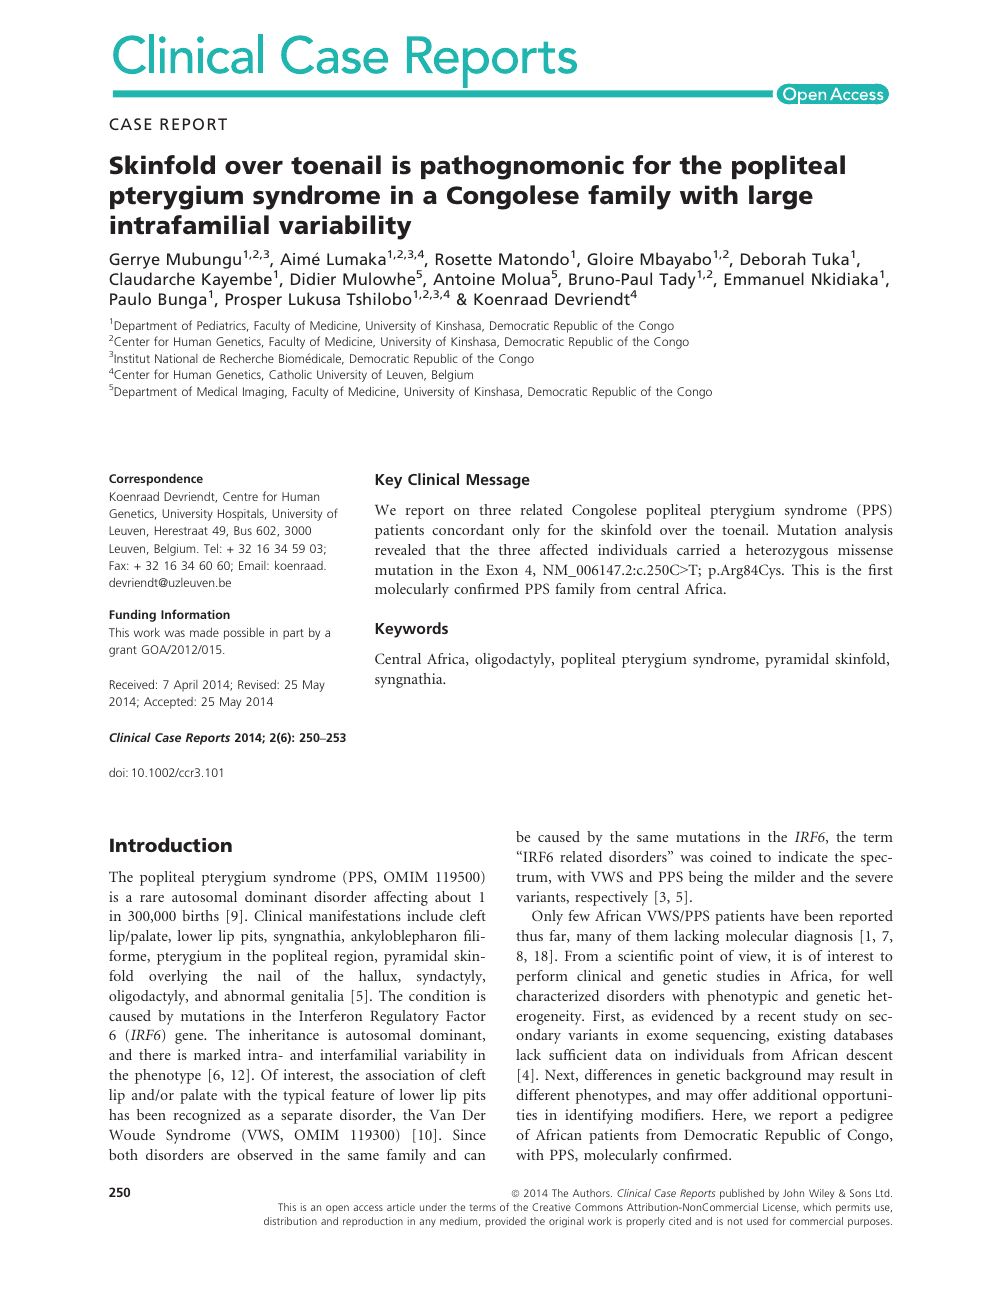 Skinfold Over Toenail Is Pathognomonic For The Popliteal Pterygium Syndrome In A Congolese Family With Large Intrafamilial Variability Topic Of Research Paper In Clinical Medicine Download Scholarly Article Pdf And Read